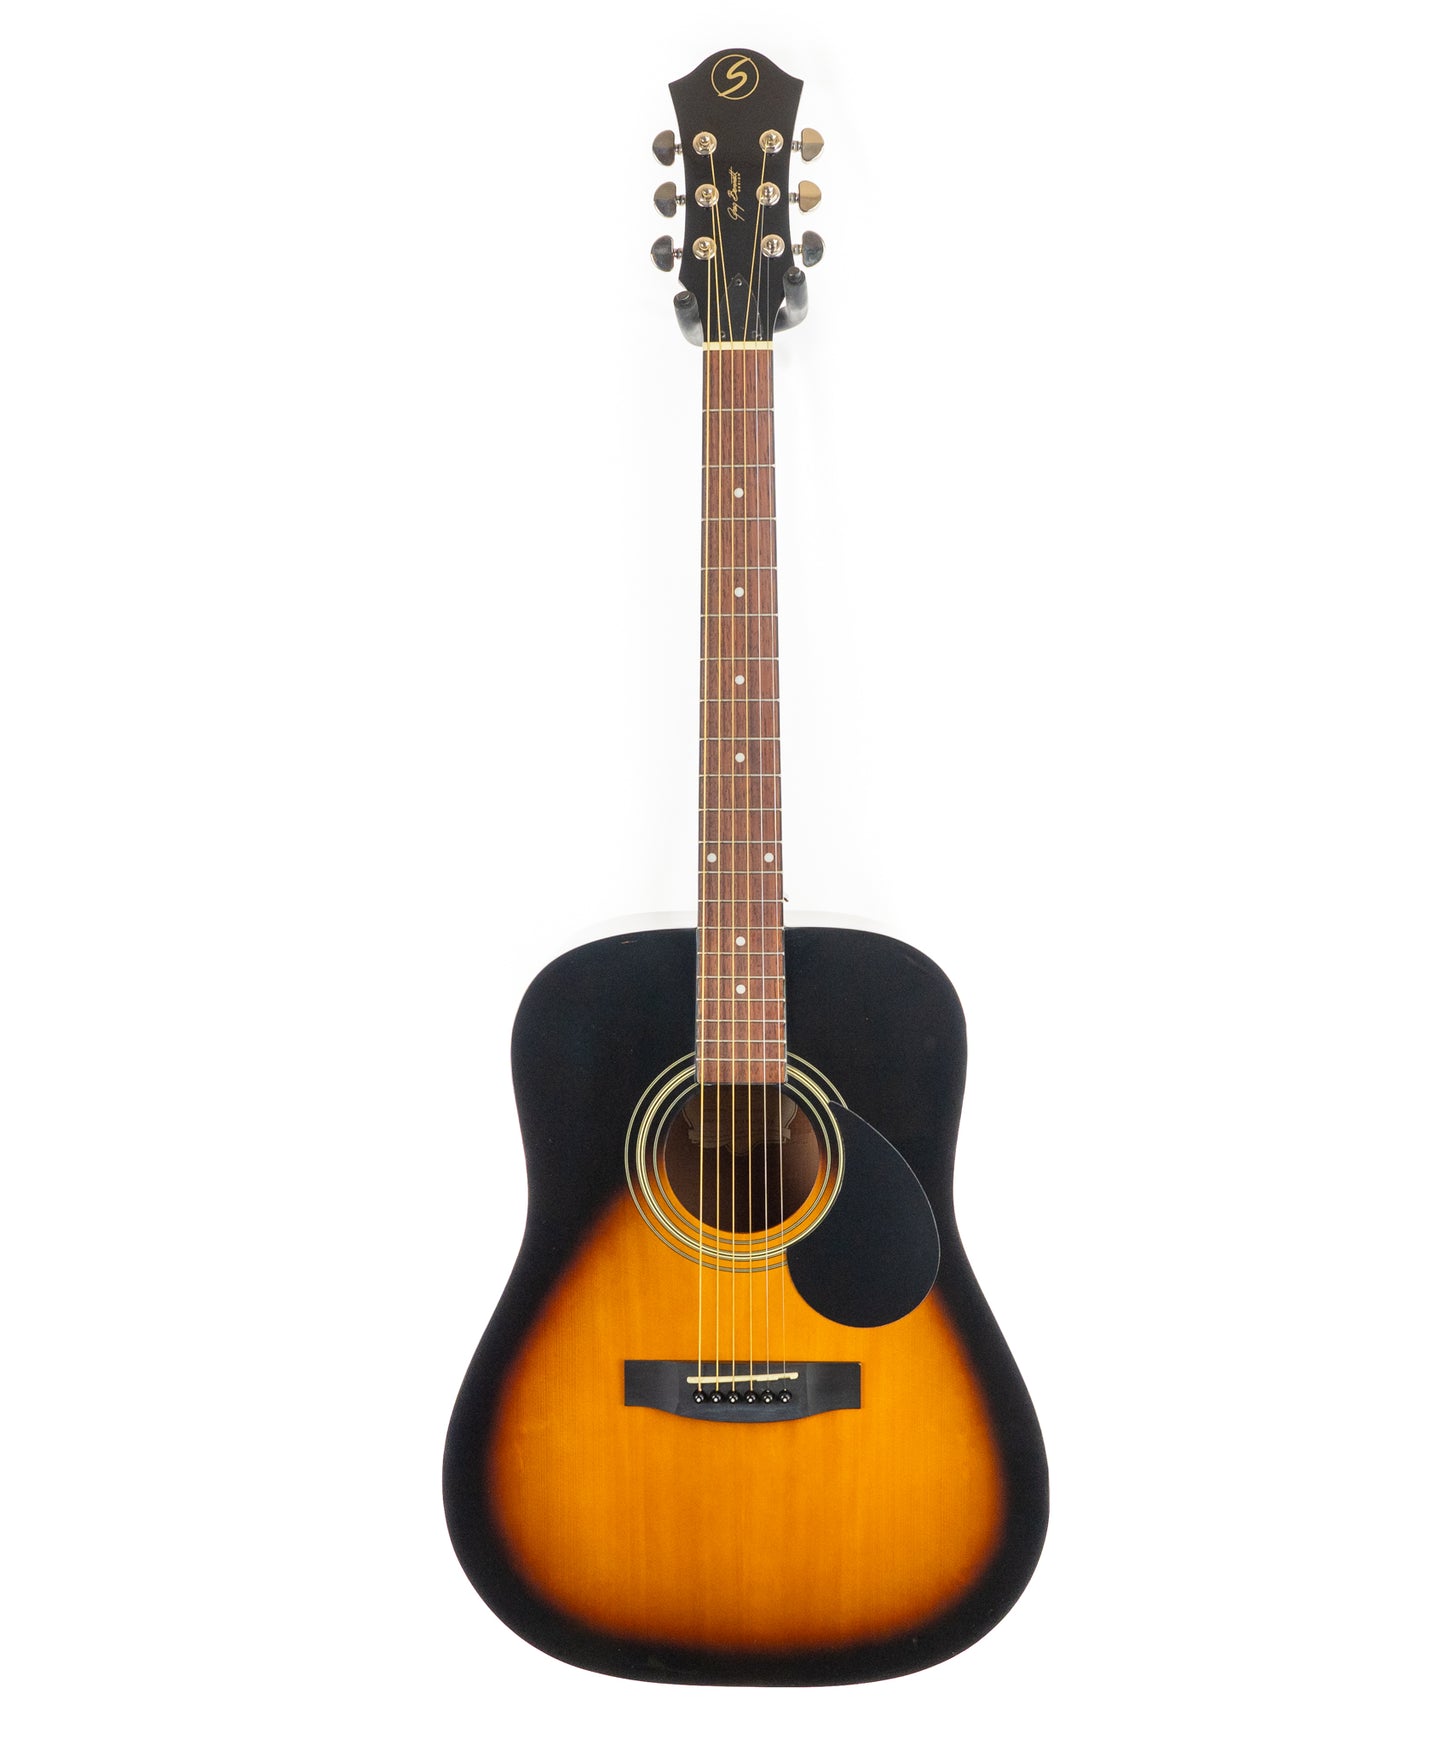 Samick SMS100VS dreadnought arched back acoustic guitar, deluxe!